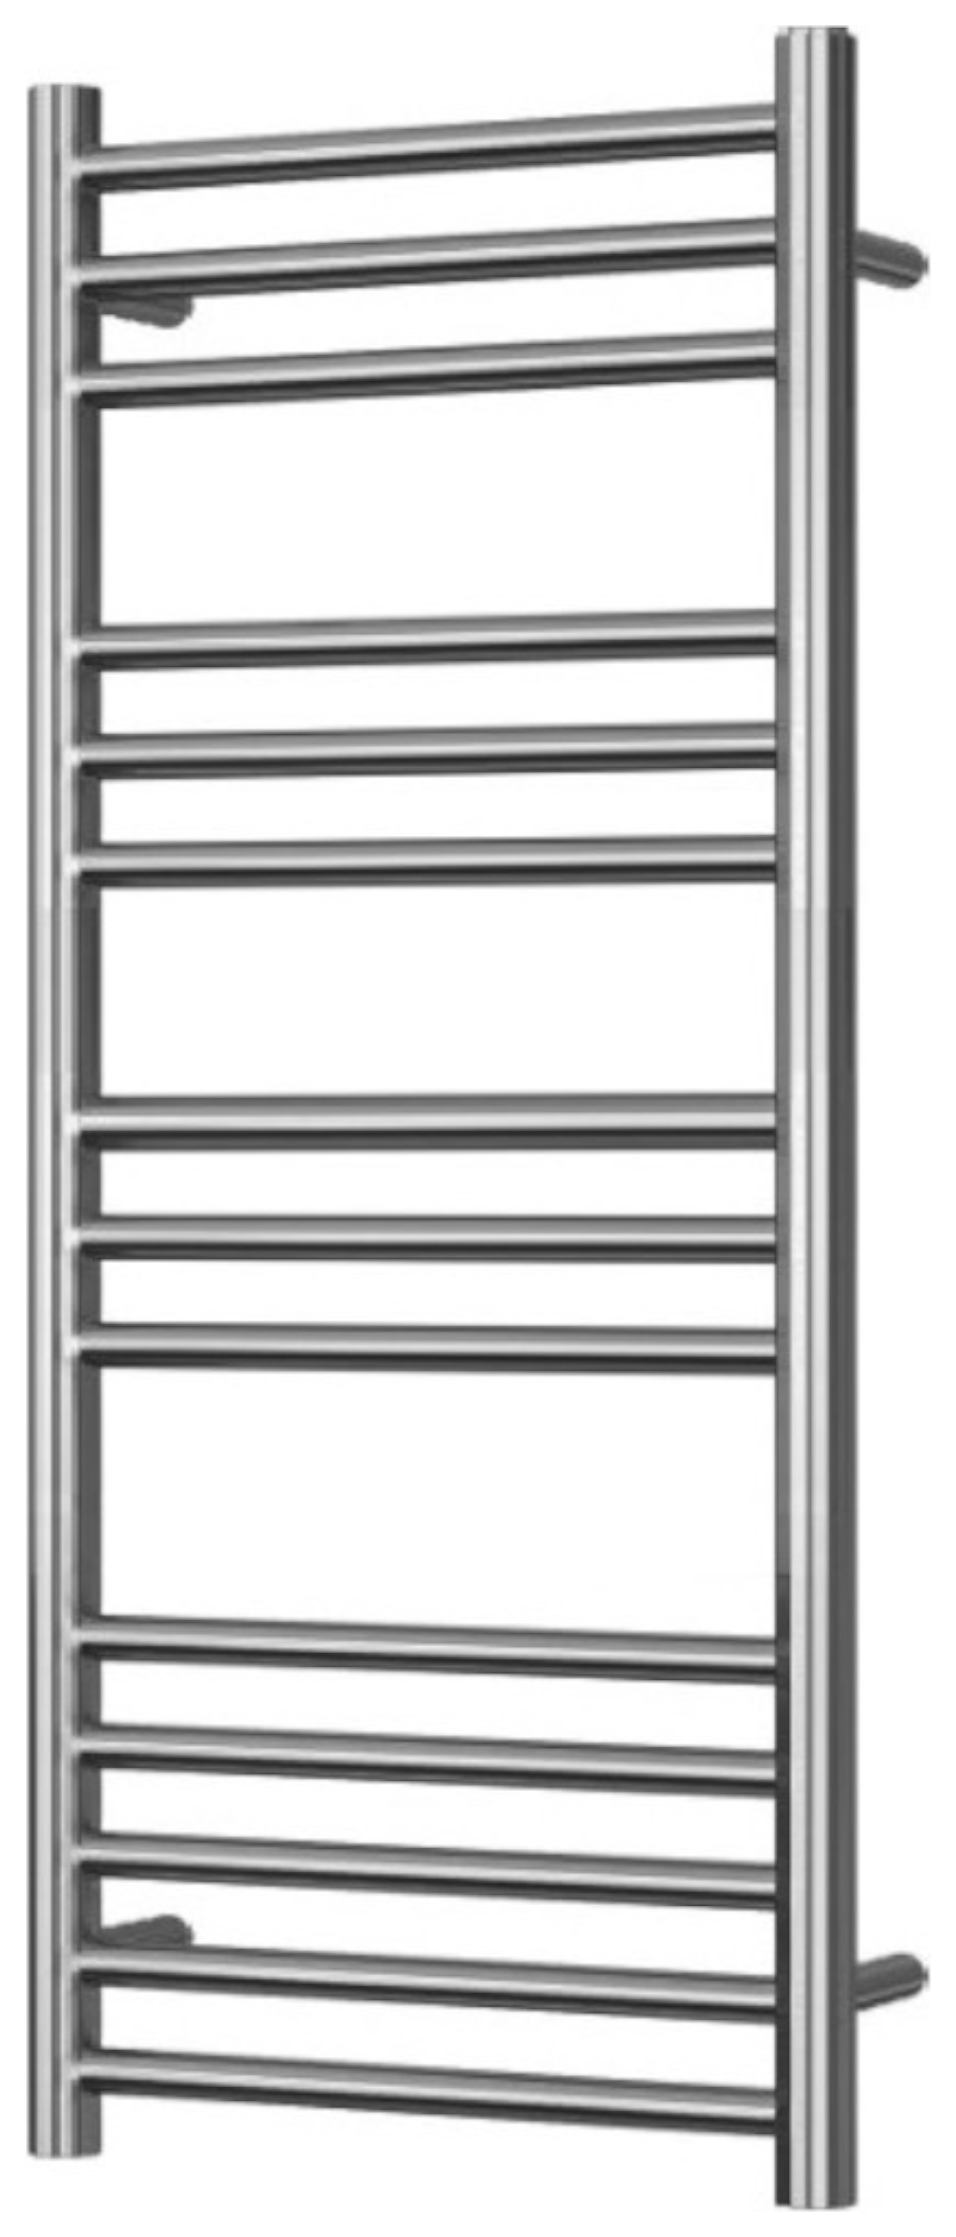 Image of Towelrads Eversley Polished Stainless Towel Radiator - 1000 x 500mm